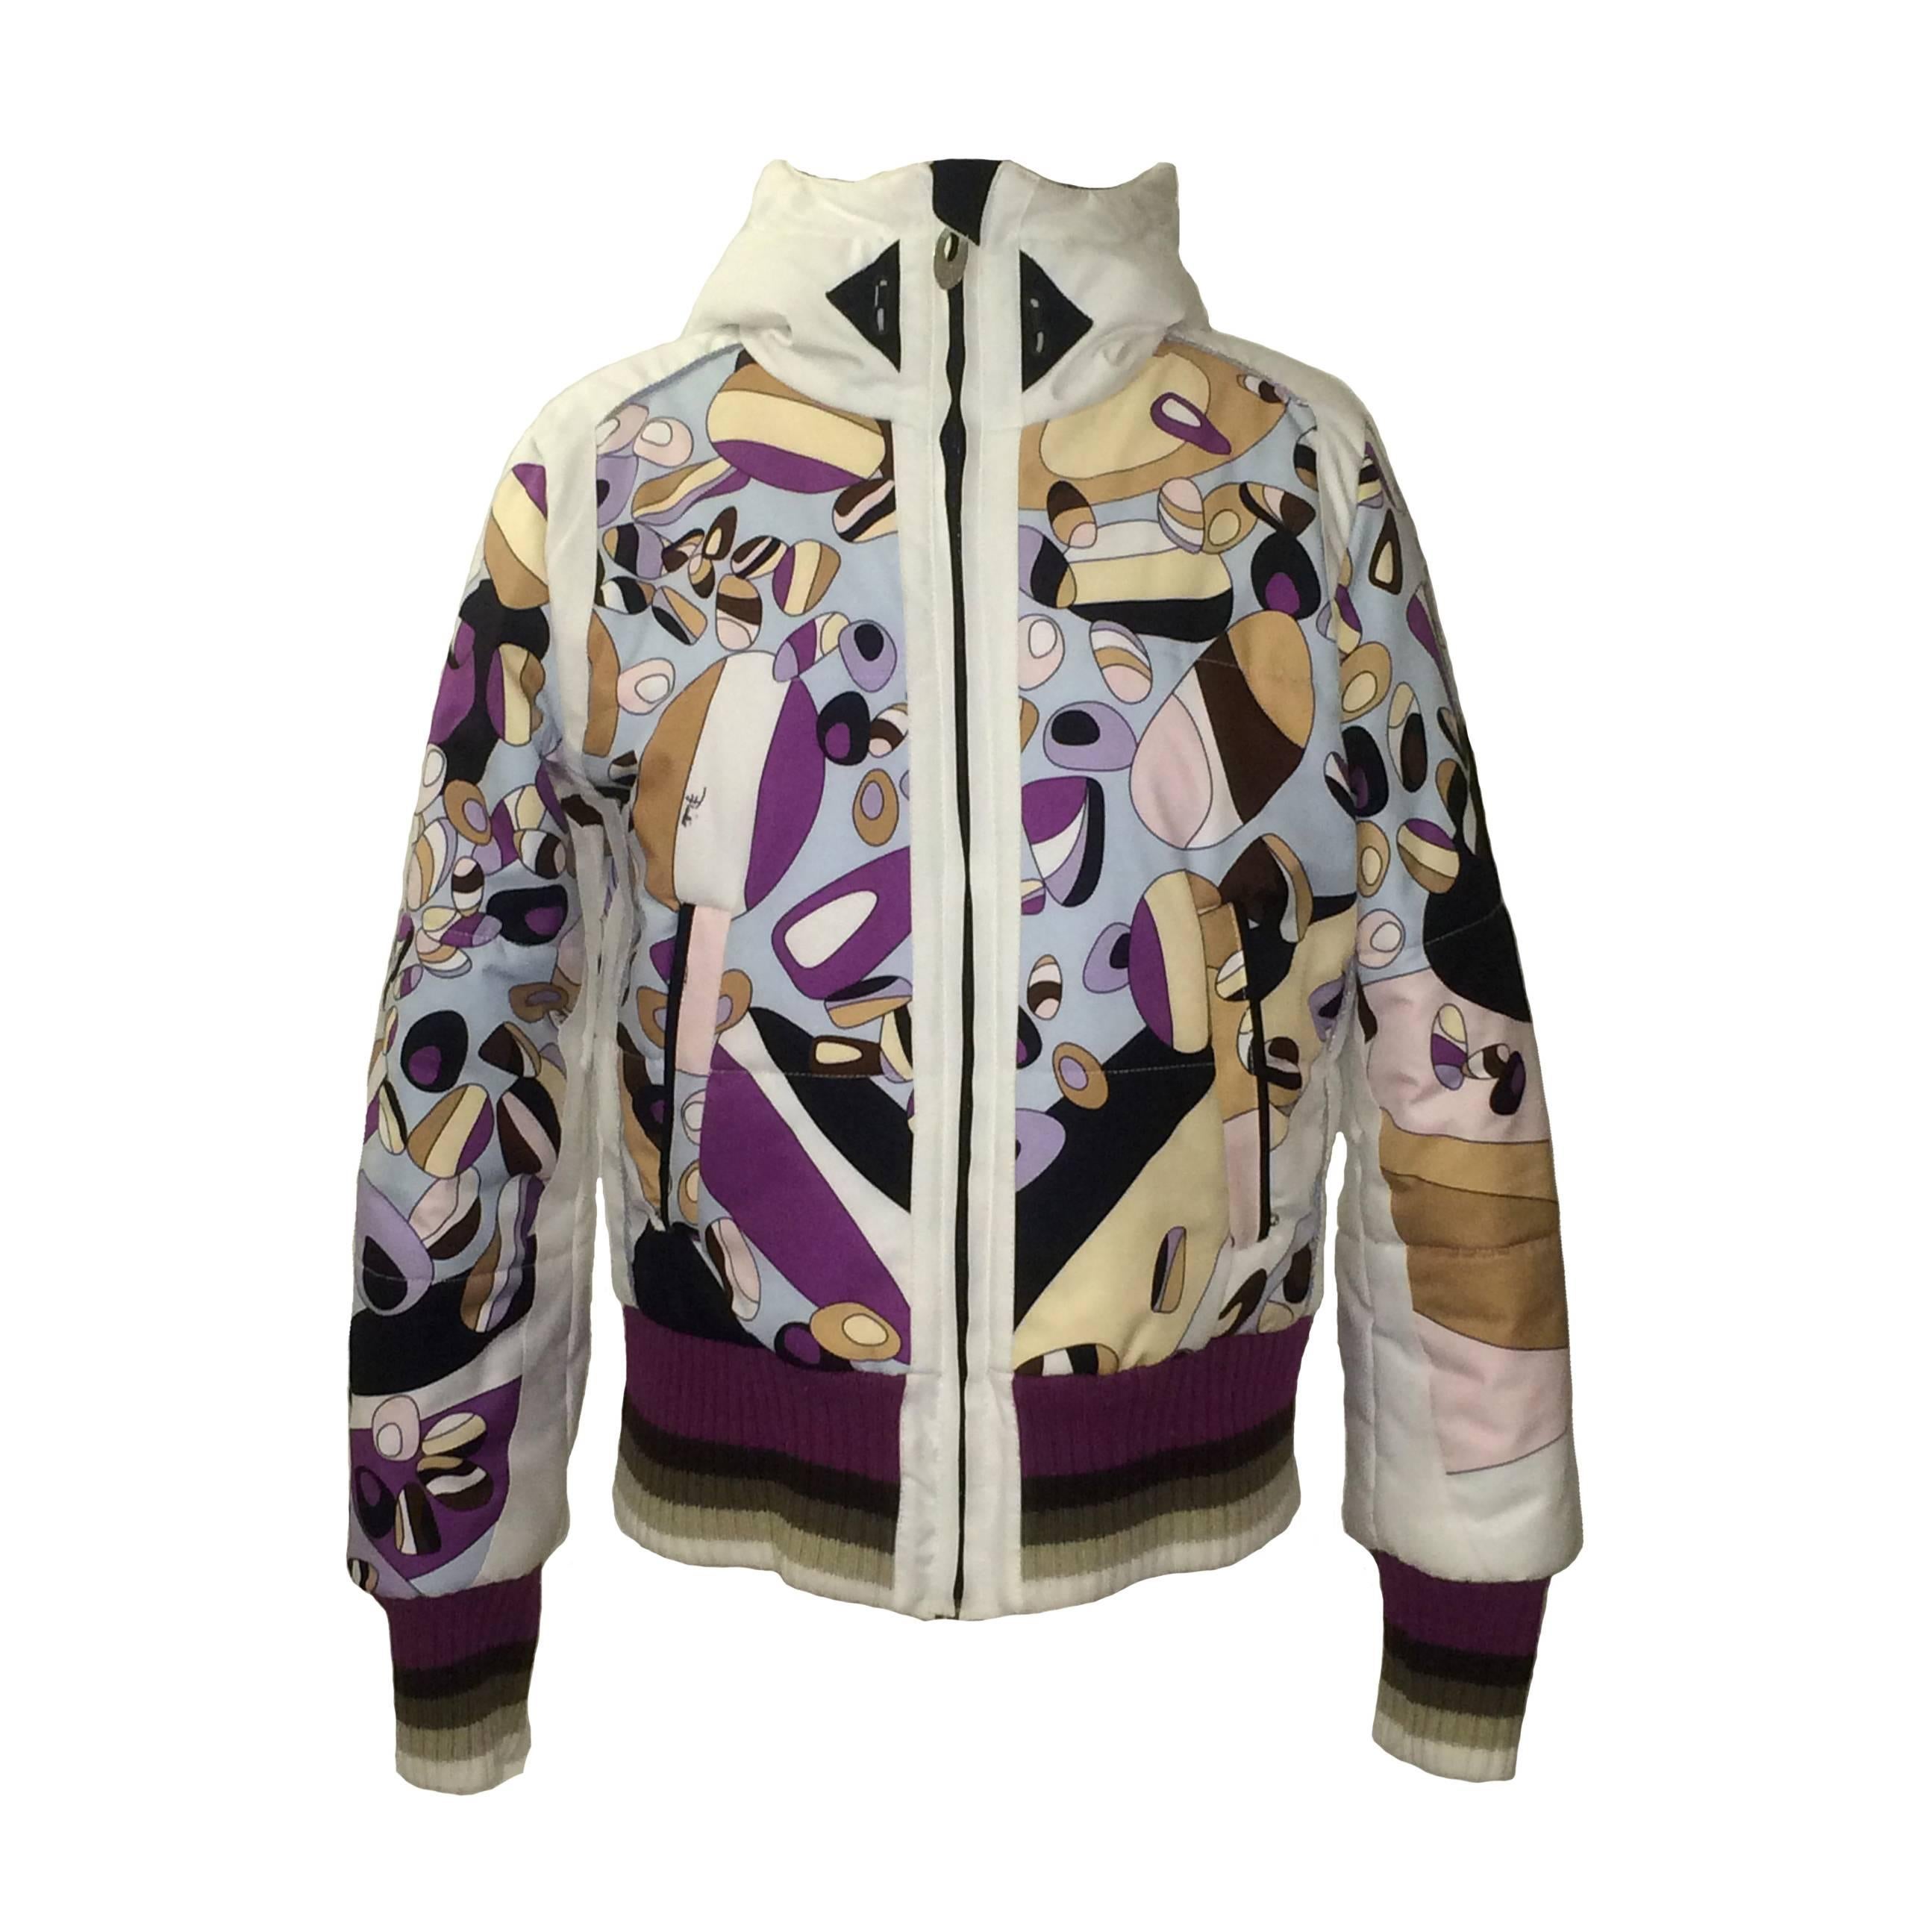 Emilio Pucci for Rossignol Pucci Print Winter Ski Jacket with Hood and Knit Trim